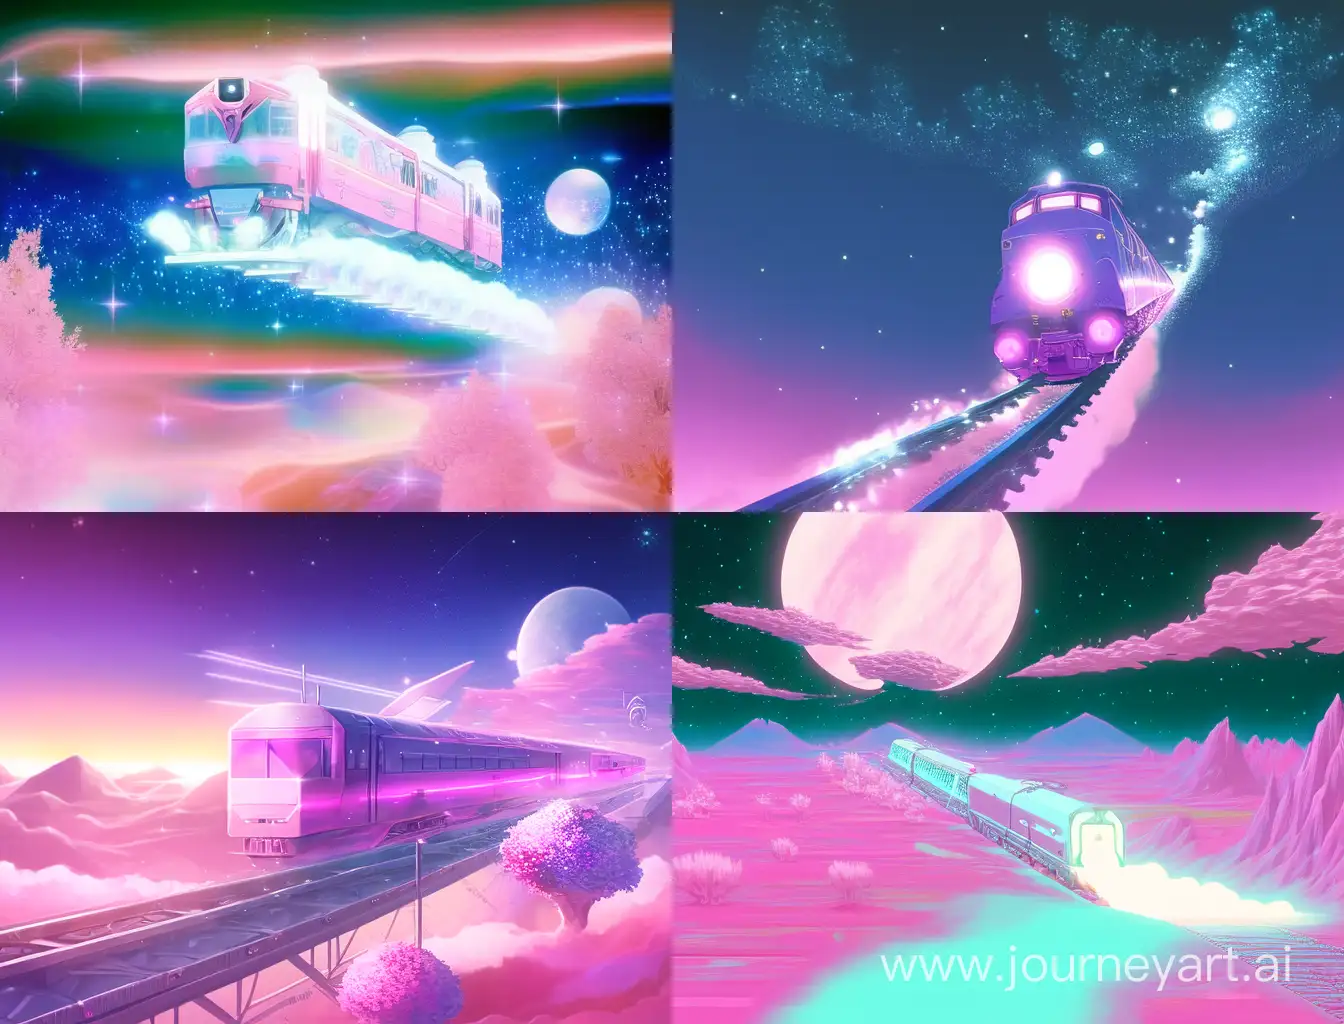 Dreamy-Mars-Train-Soaring-with-Glowing-White-Energies